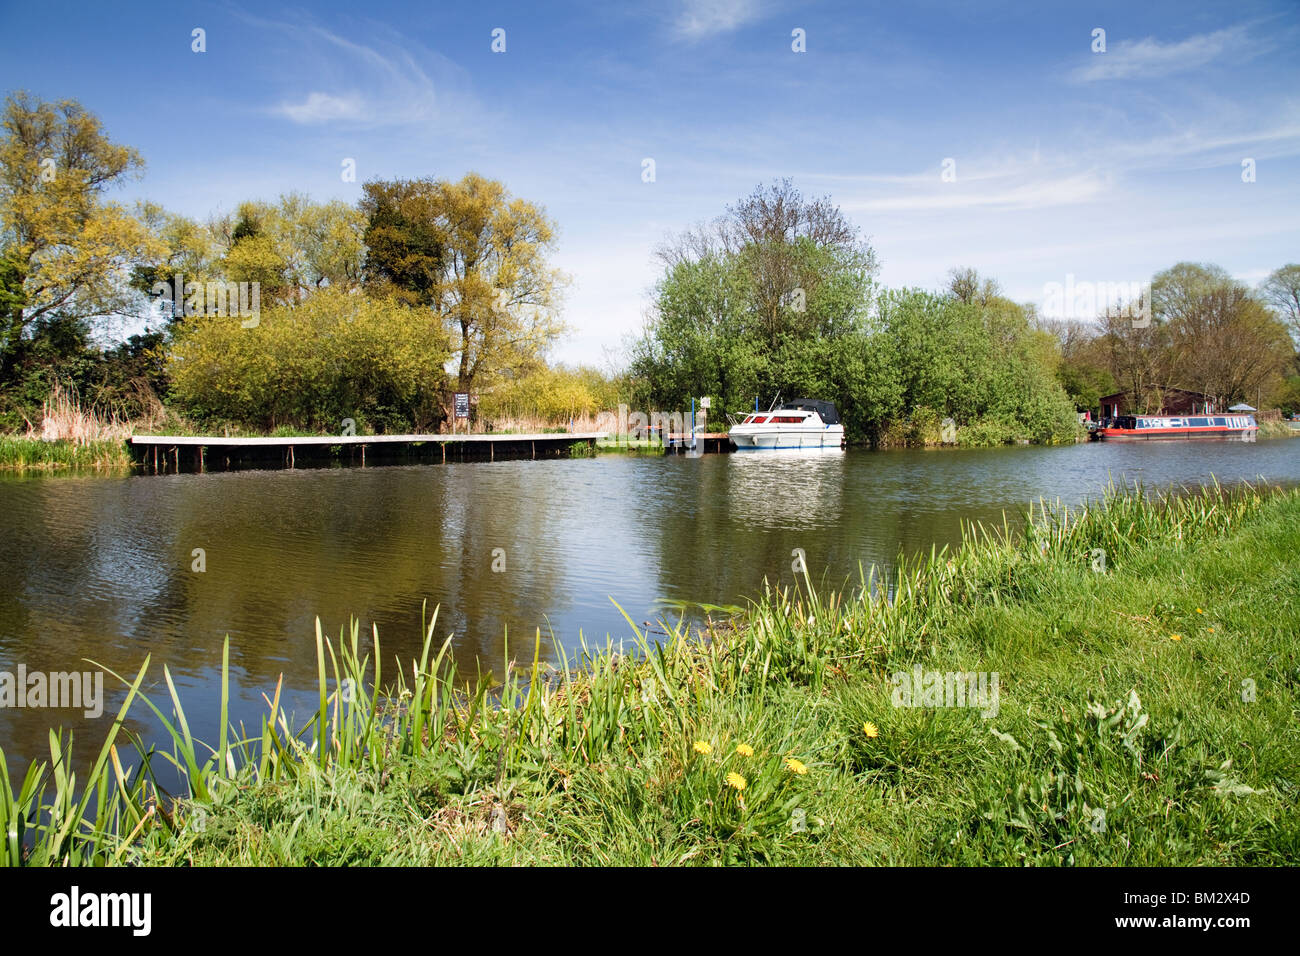 Boat On The River Ouse The Meadows Near Houghton Village In Cambridgeshire, East Anglia England The United Kingdom UK Stock Photo